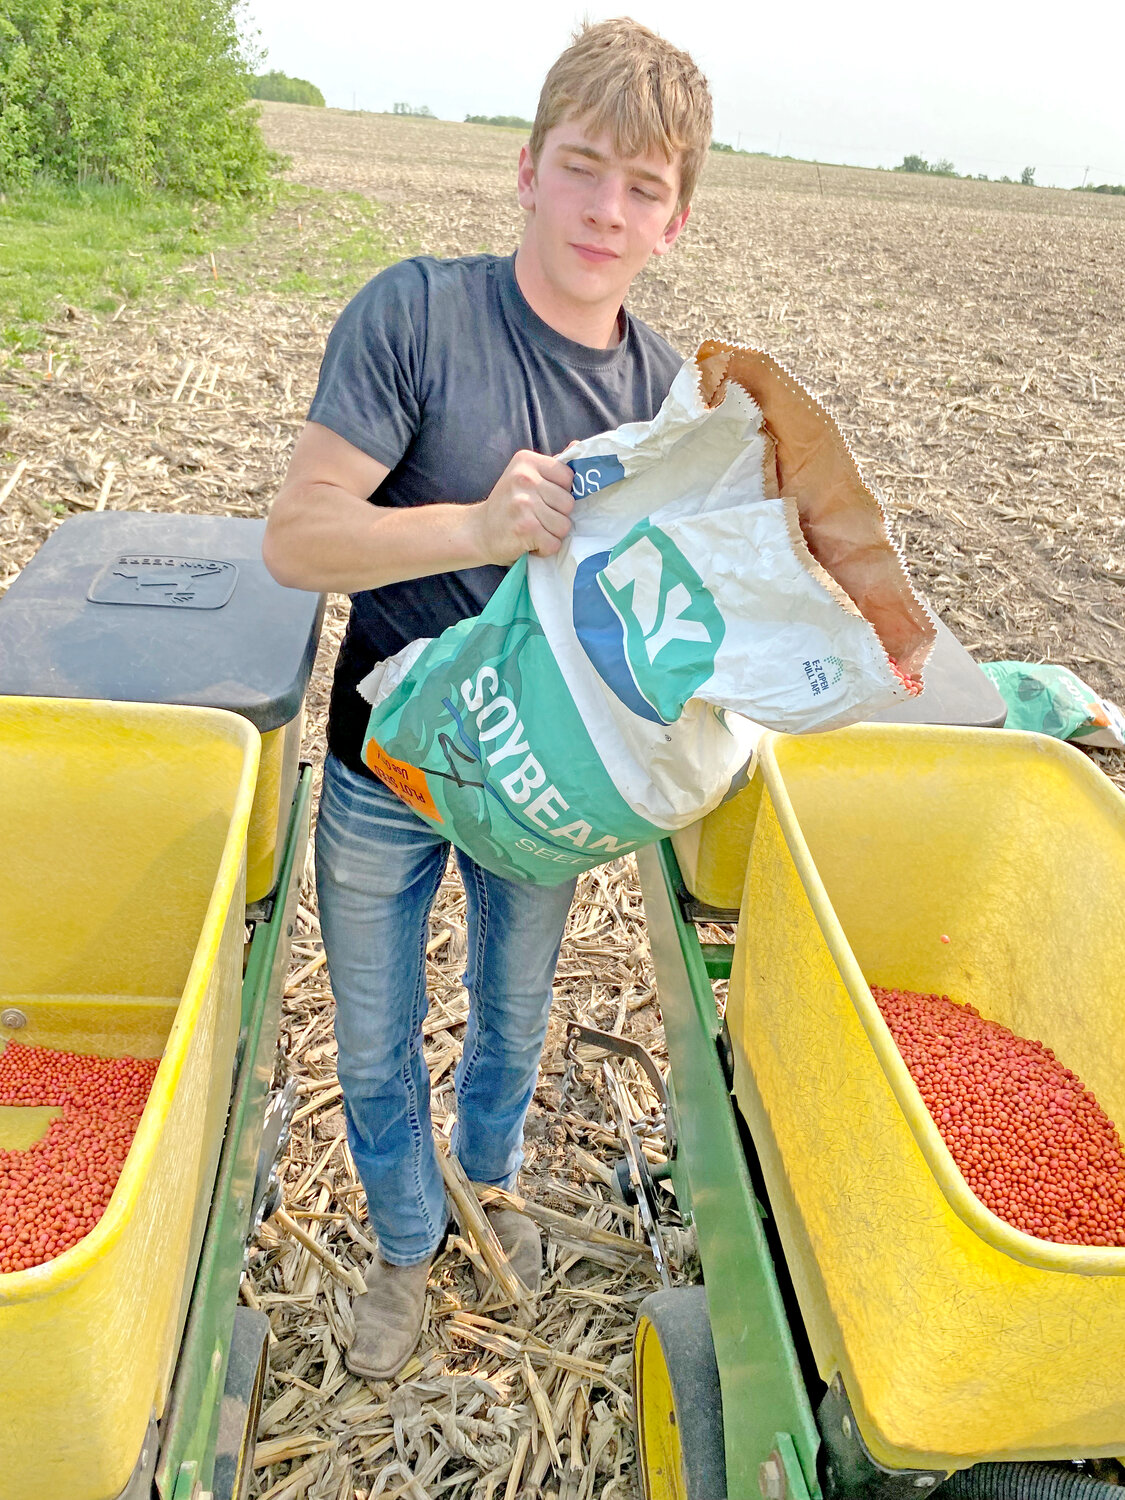 Brock Thomann (freshman) filling the planter with seed.